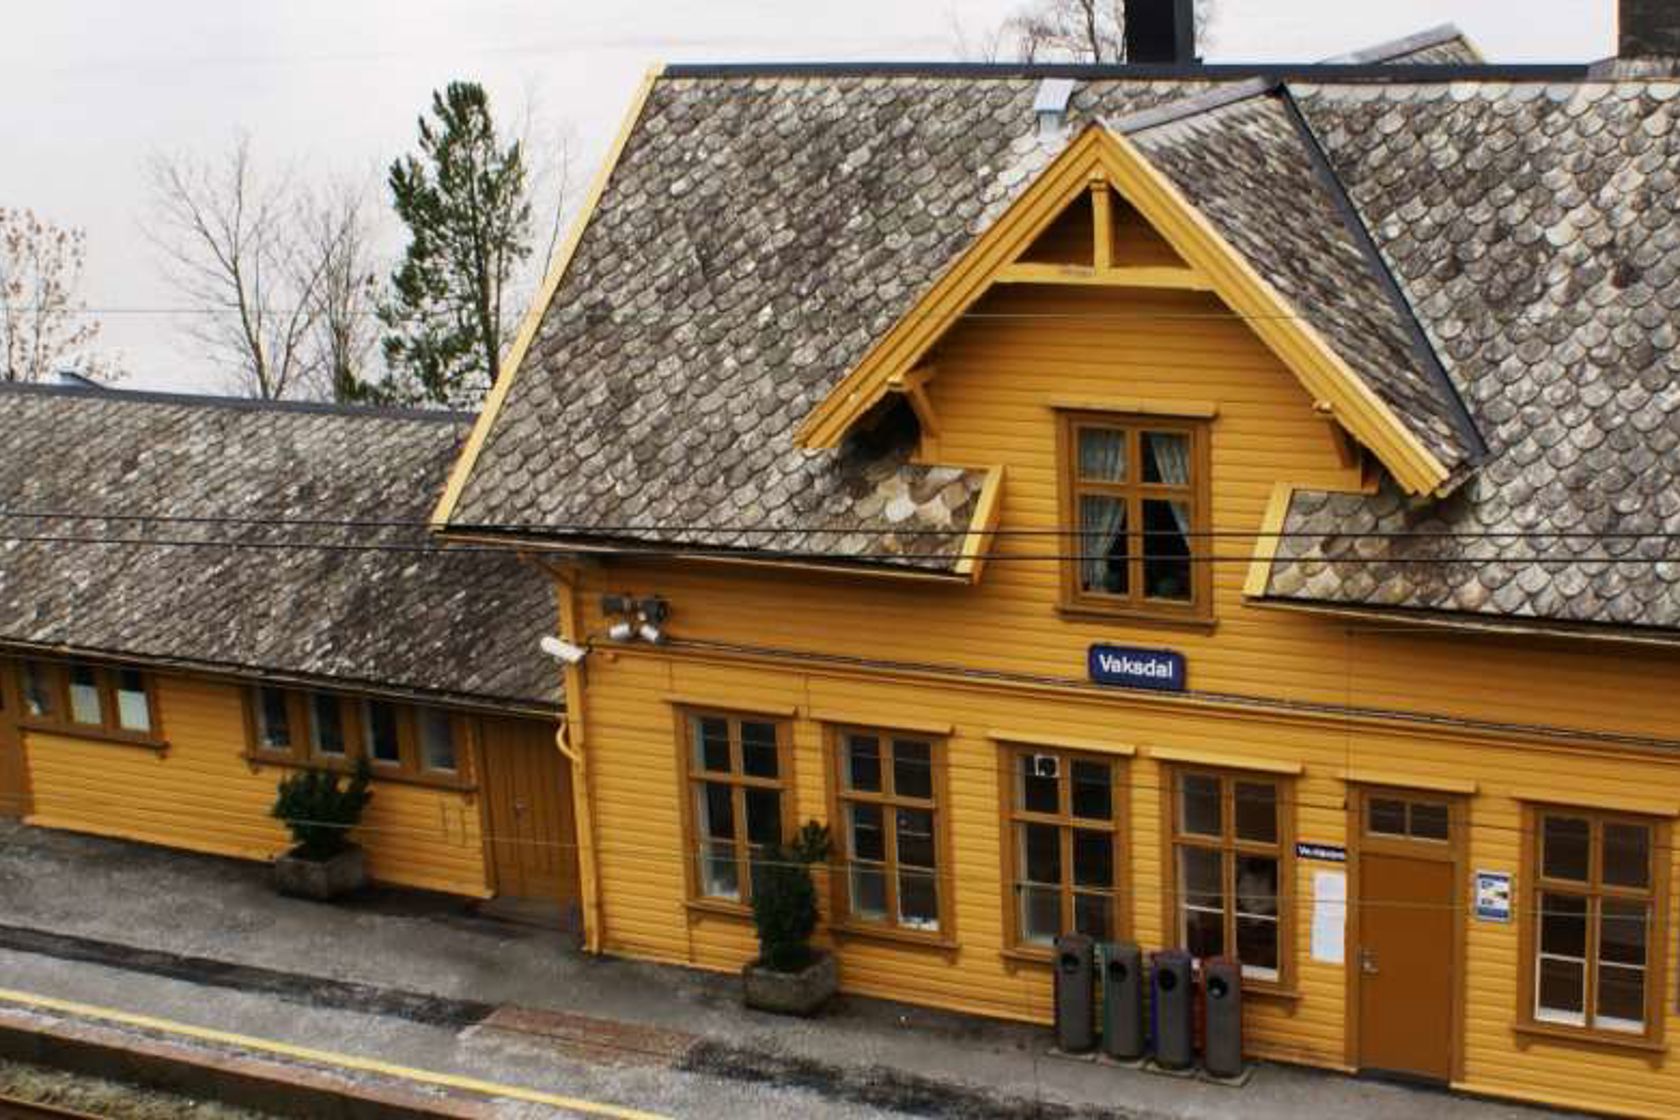 Exterior view of Vaksdal station